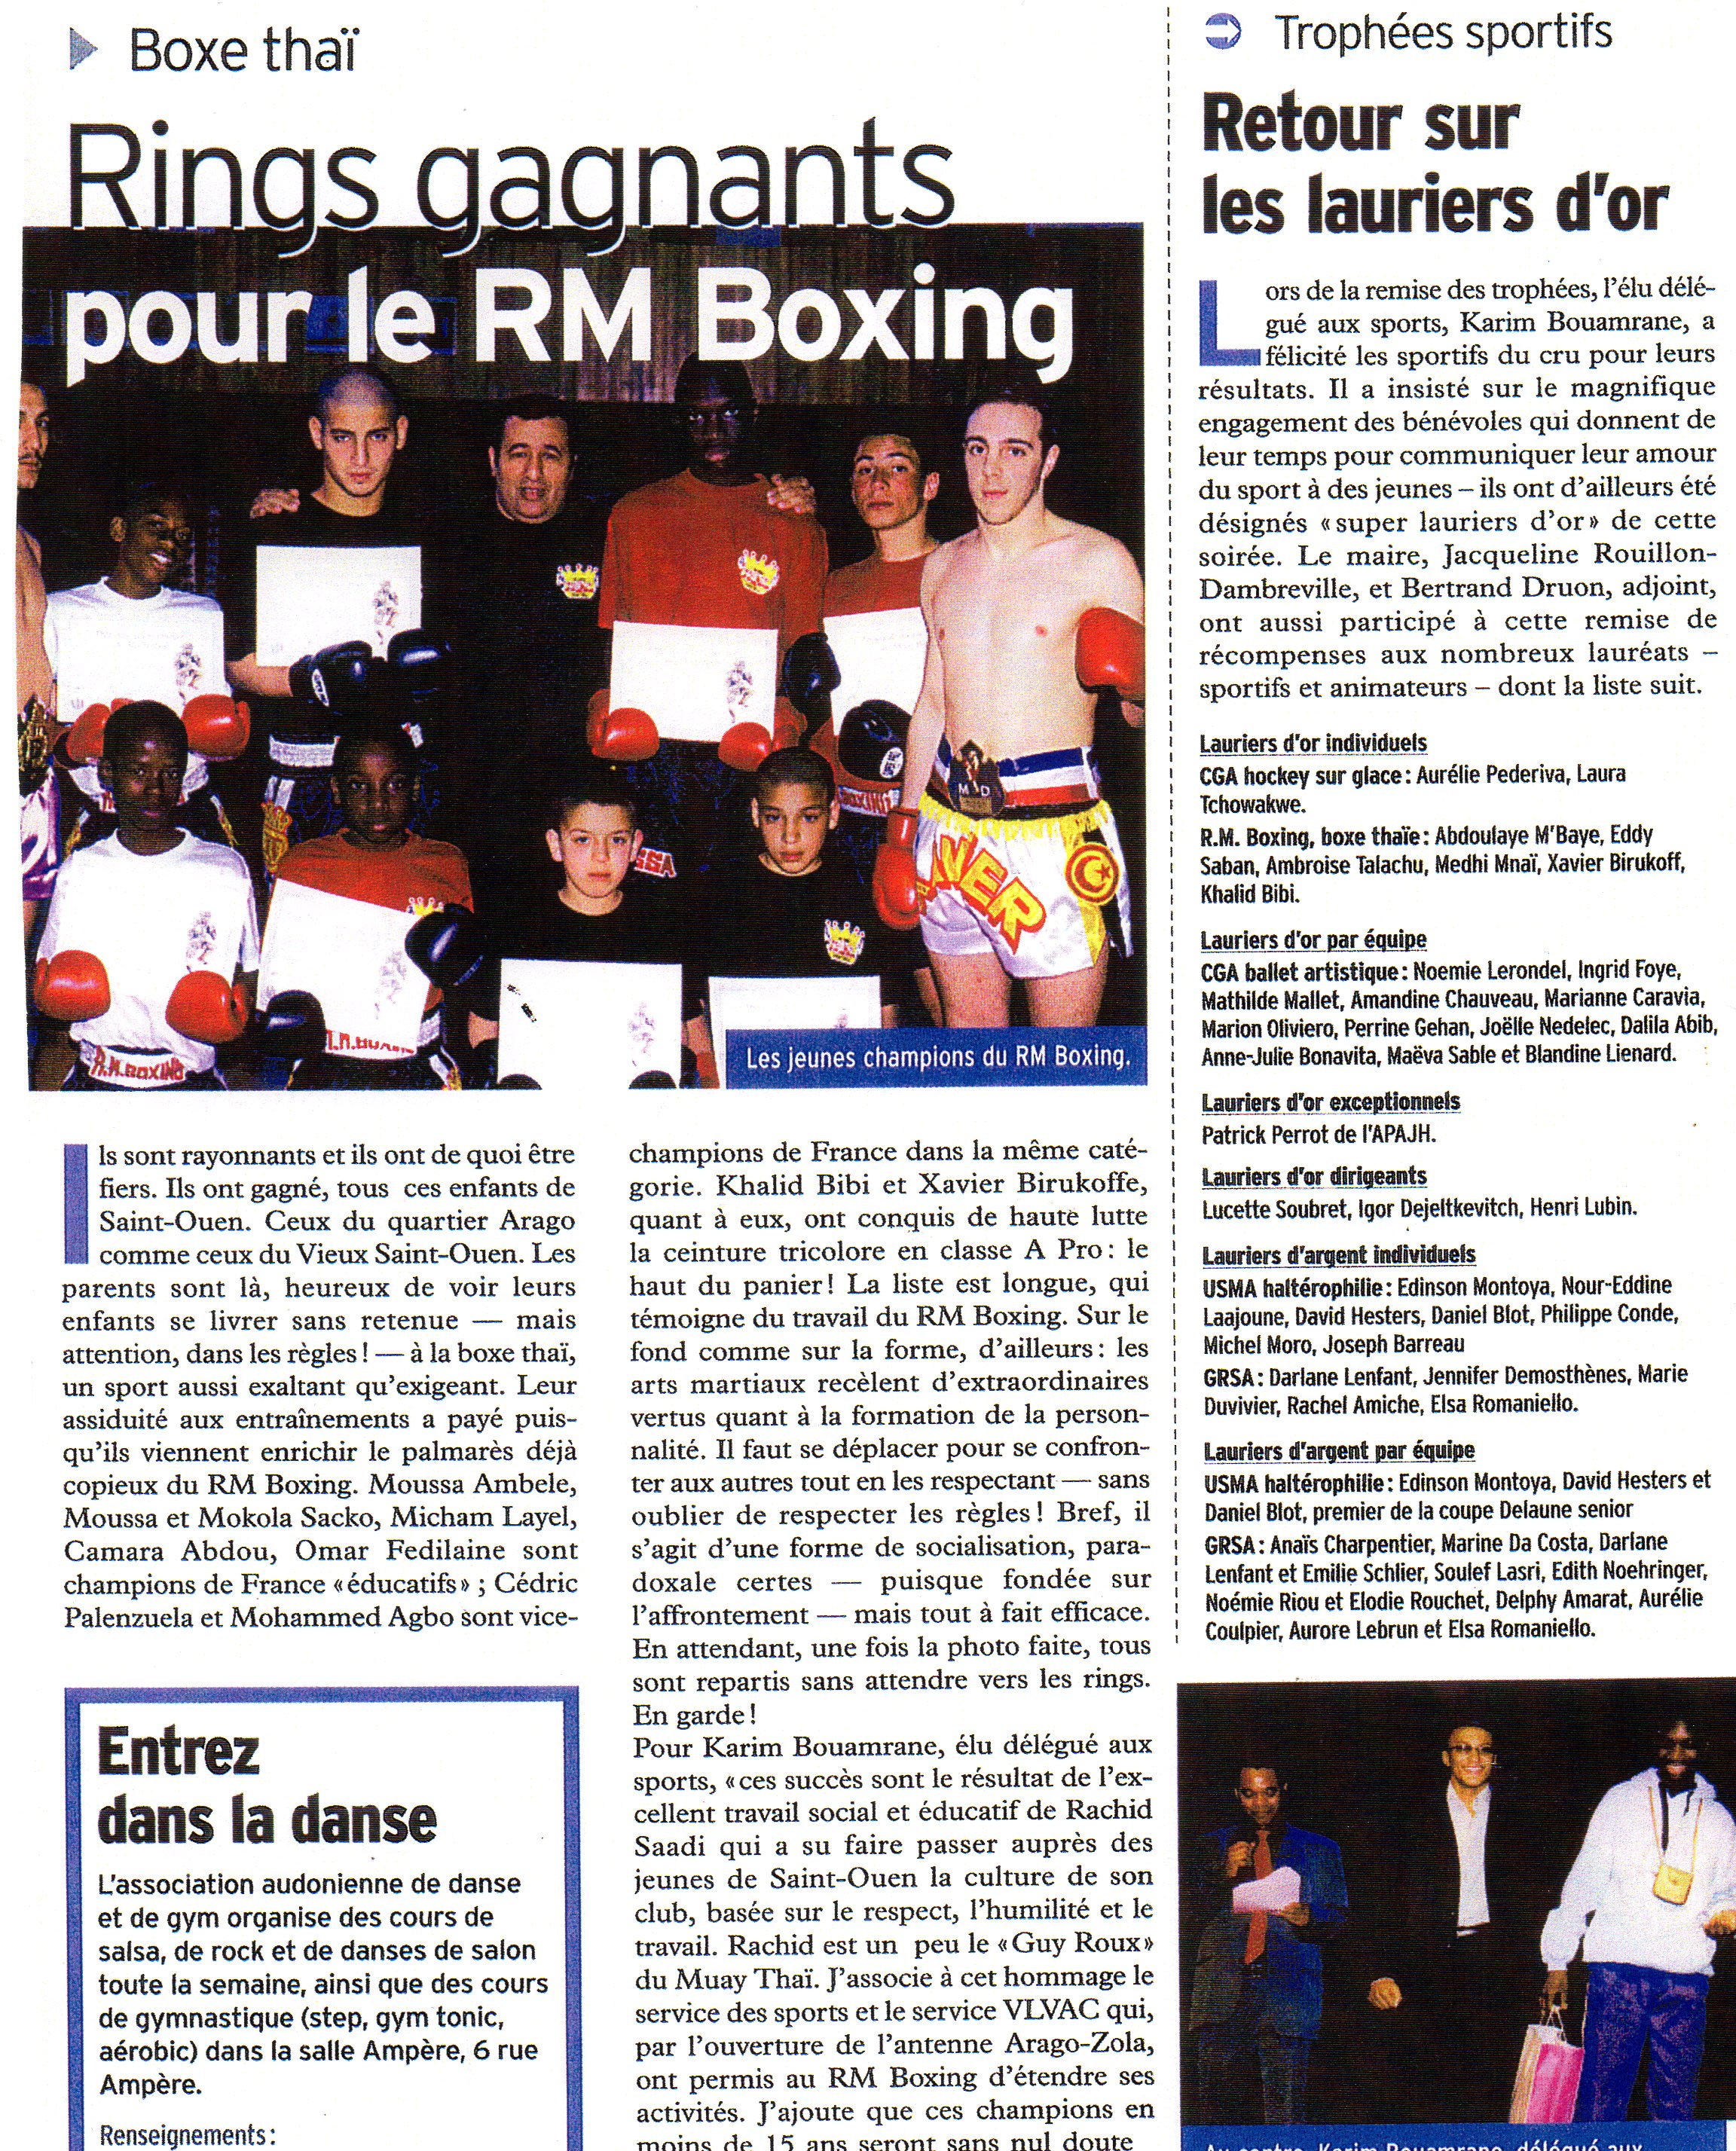 ring gagnant pour le rmboxing